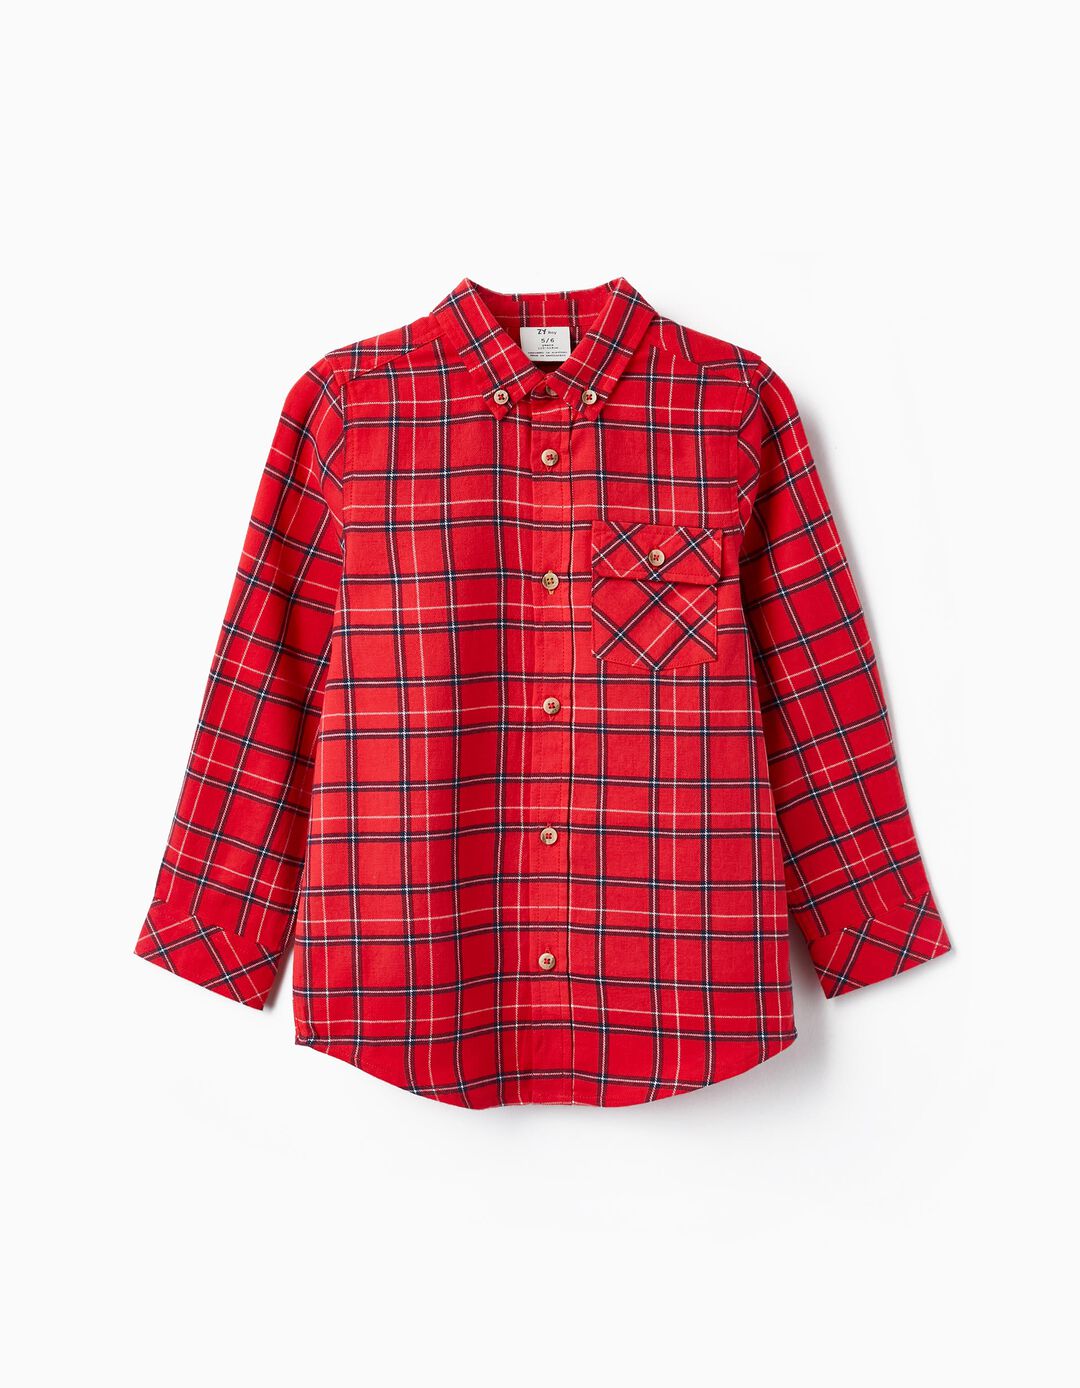 Cotton Checkered Shirt for Boys, Red